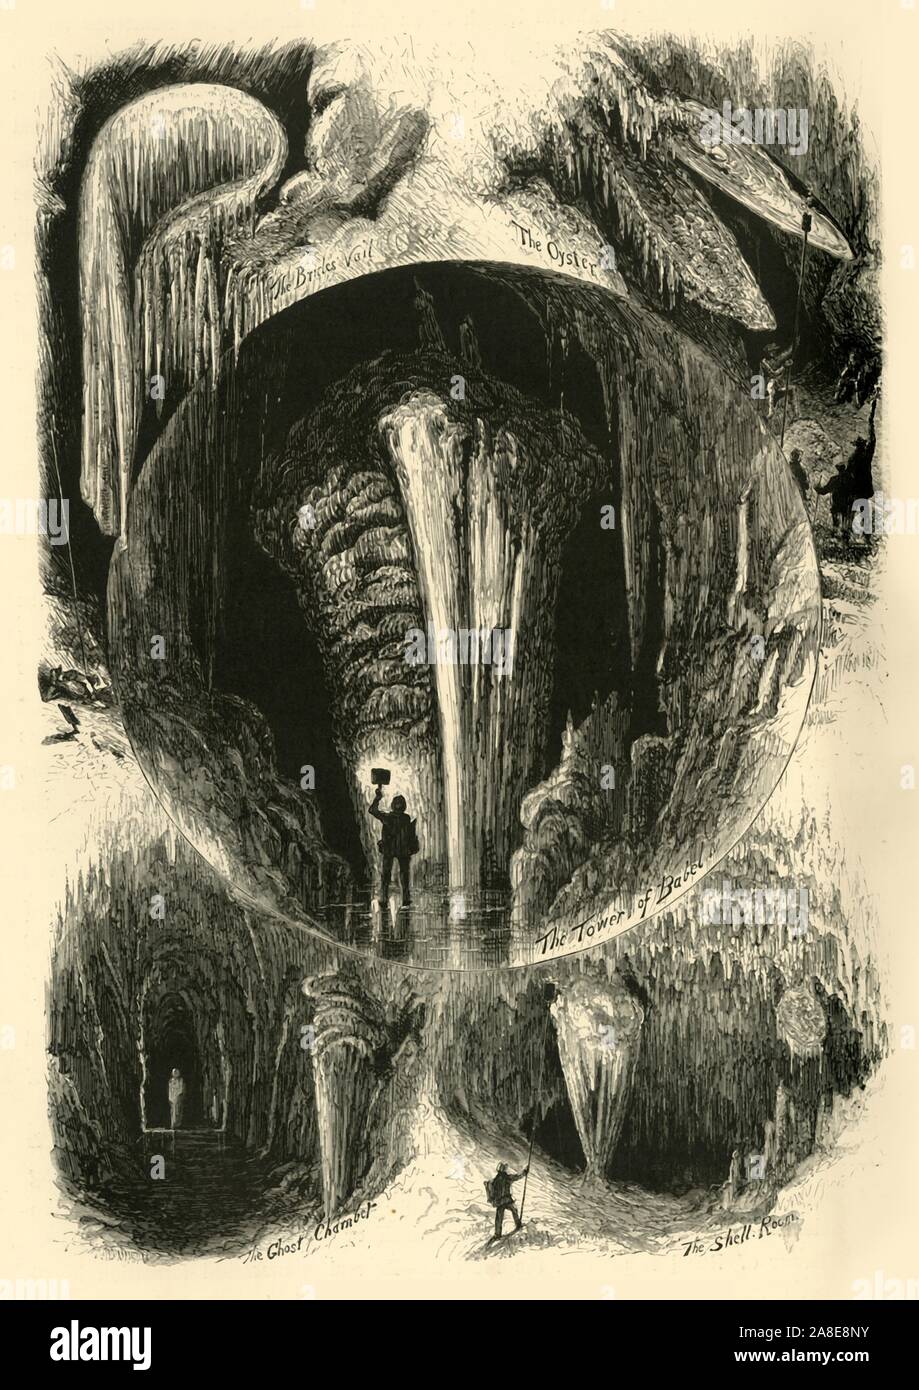 'Chambers in Weyer's Cave', 1872. 'The Bride's Veil, The Oyster, The Tower of Babel, The Ghost Chamber, The Shell Room': rock formations in Weyer's Cave, (later known as the Grand Caverns) in the town of Grottoes, Virginia, USA. From &quot;Picturesque America; or, The Land We Live In, A Delineation by Pen and Pencil of the Mountains, Rivers, Lakes...with Illustrations on Steel and Wood by Eminent American Artists&quot; Vol. I, edited by William Cullen Bryant. [D. Appleton and Company, New York, 1872] Stock Photo